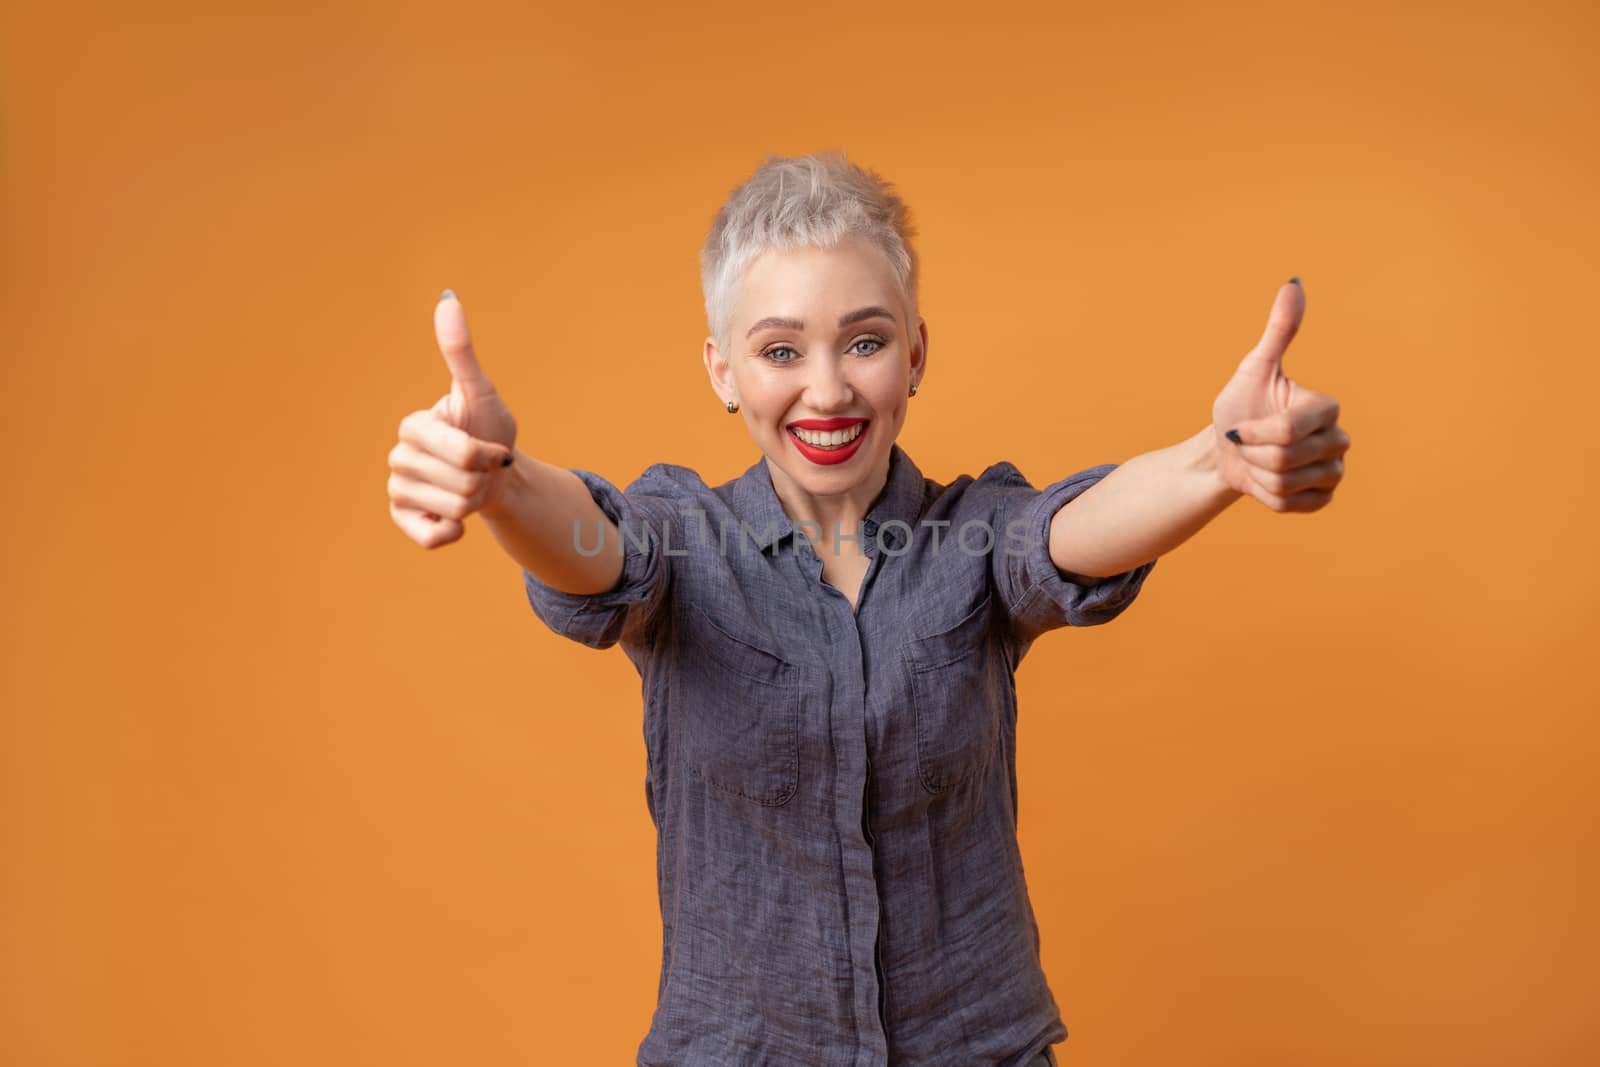 Portrait of young girl with blond short hairstyle looking at camera and laugh showing thumbs up on two hands on orange background with copy space. Woman surprised and smiling. positive emotion